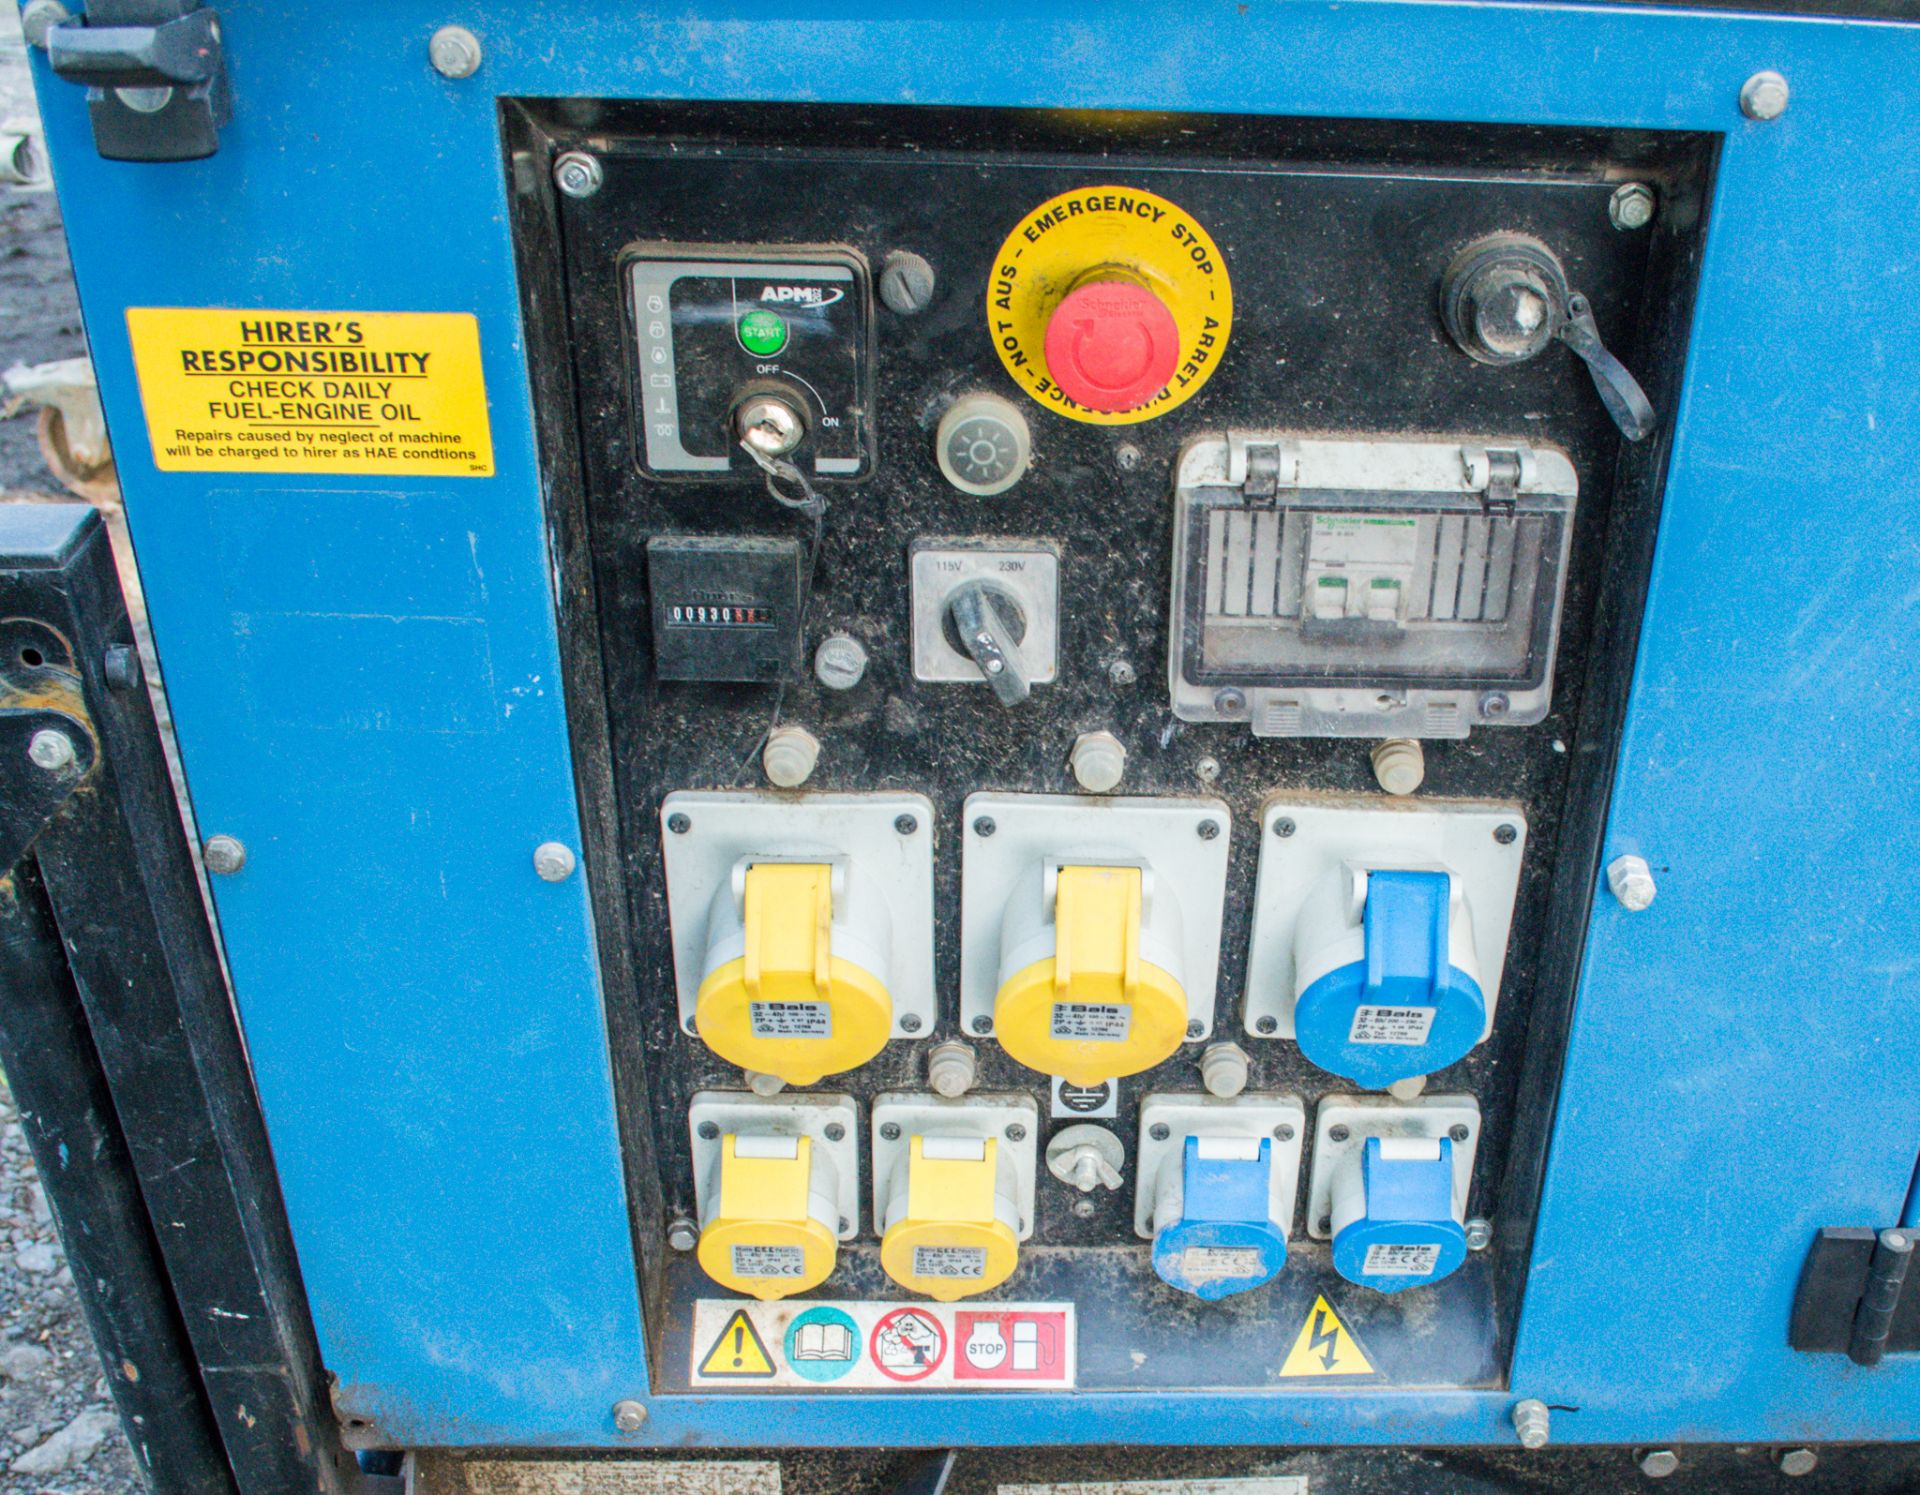 SDMO 10000 10 kva diesel driven generator Recorded Hours: 930 A987081 - Image 4 of 4